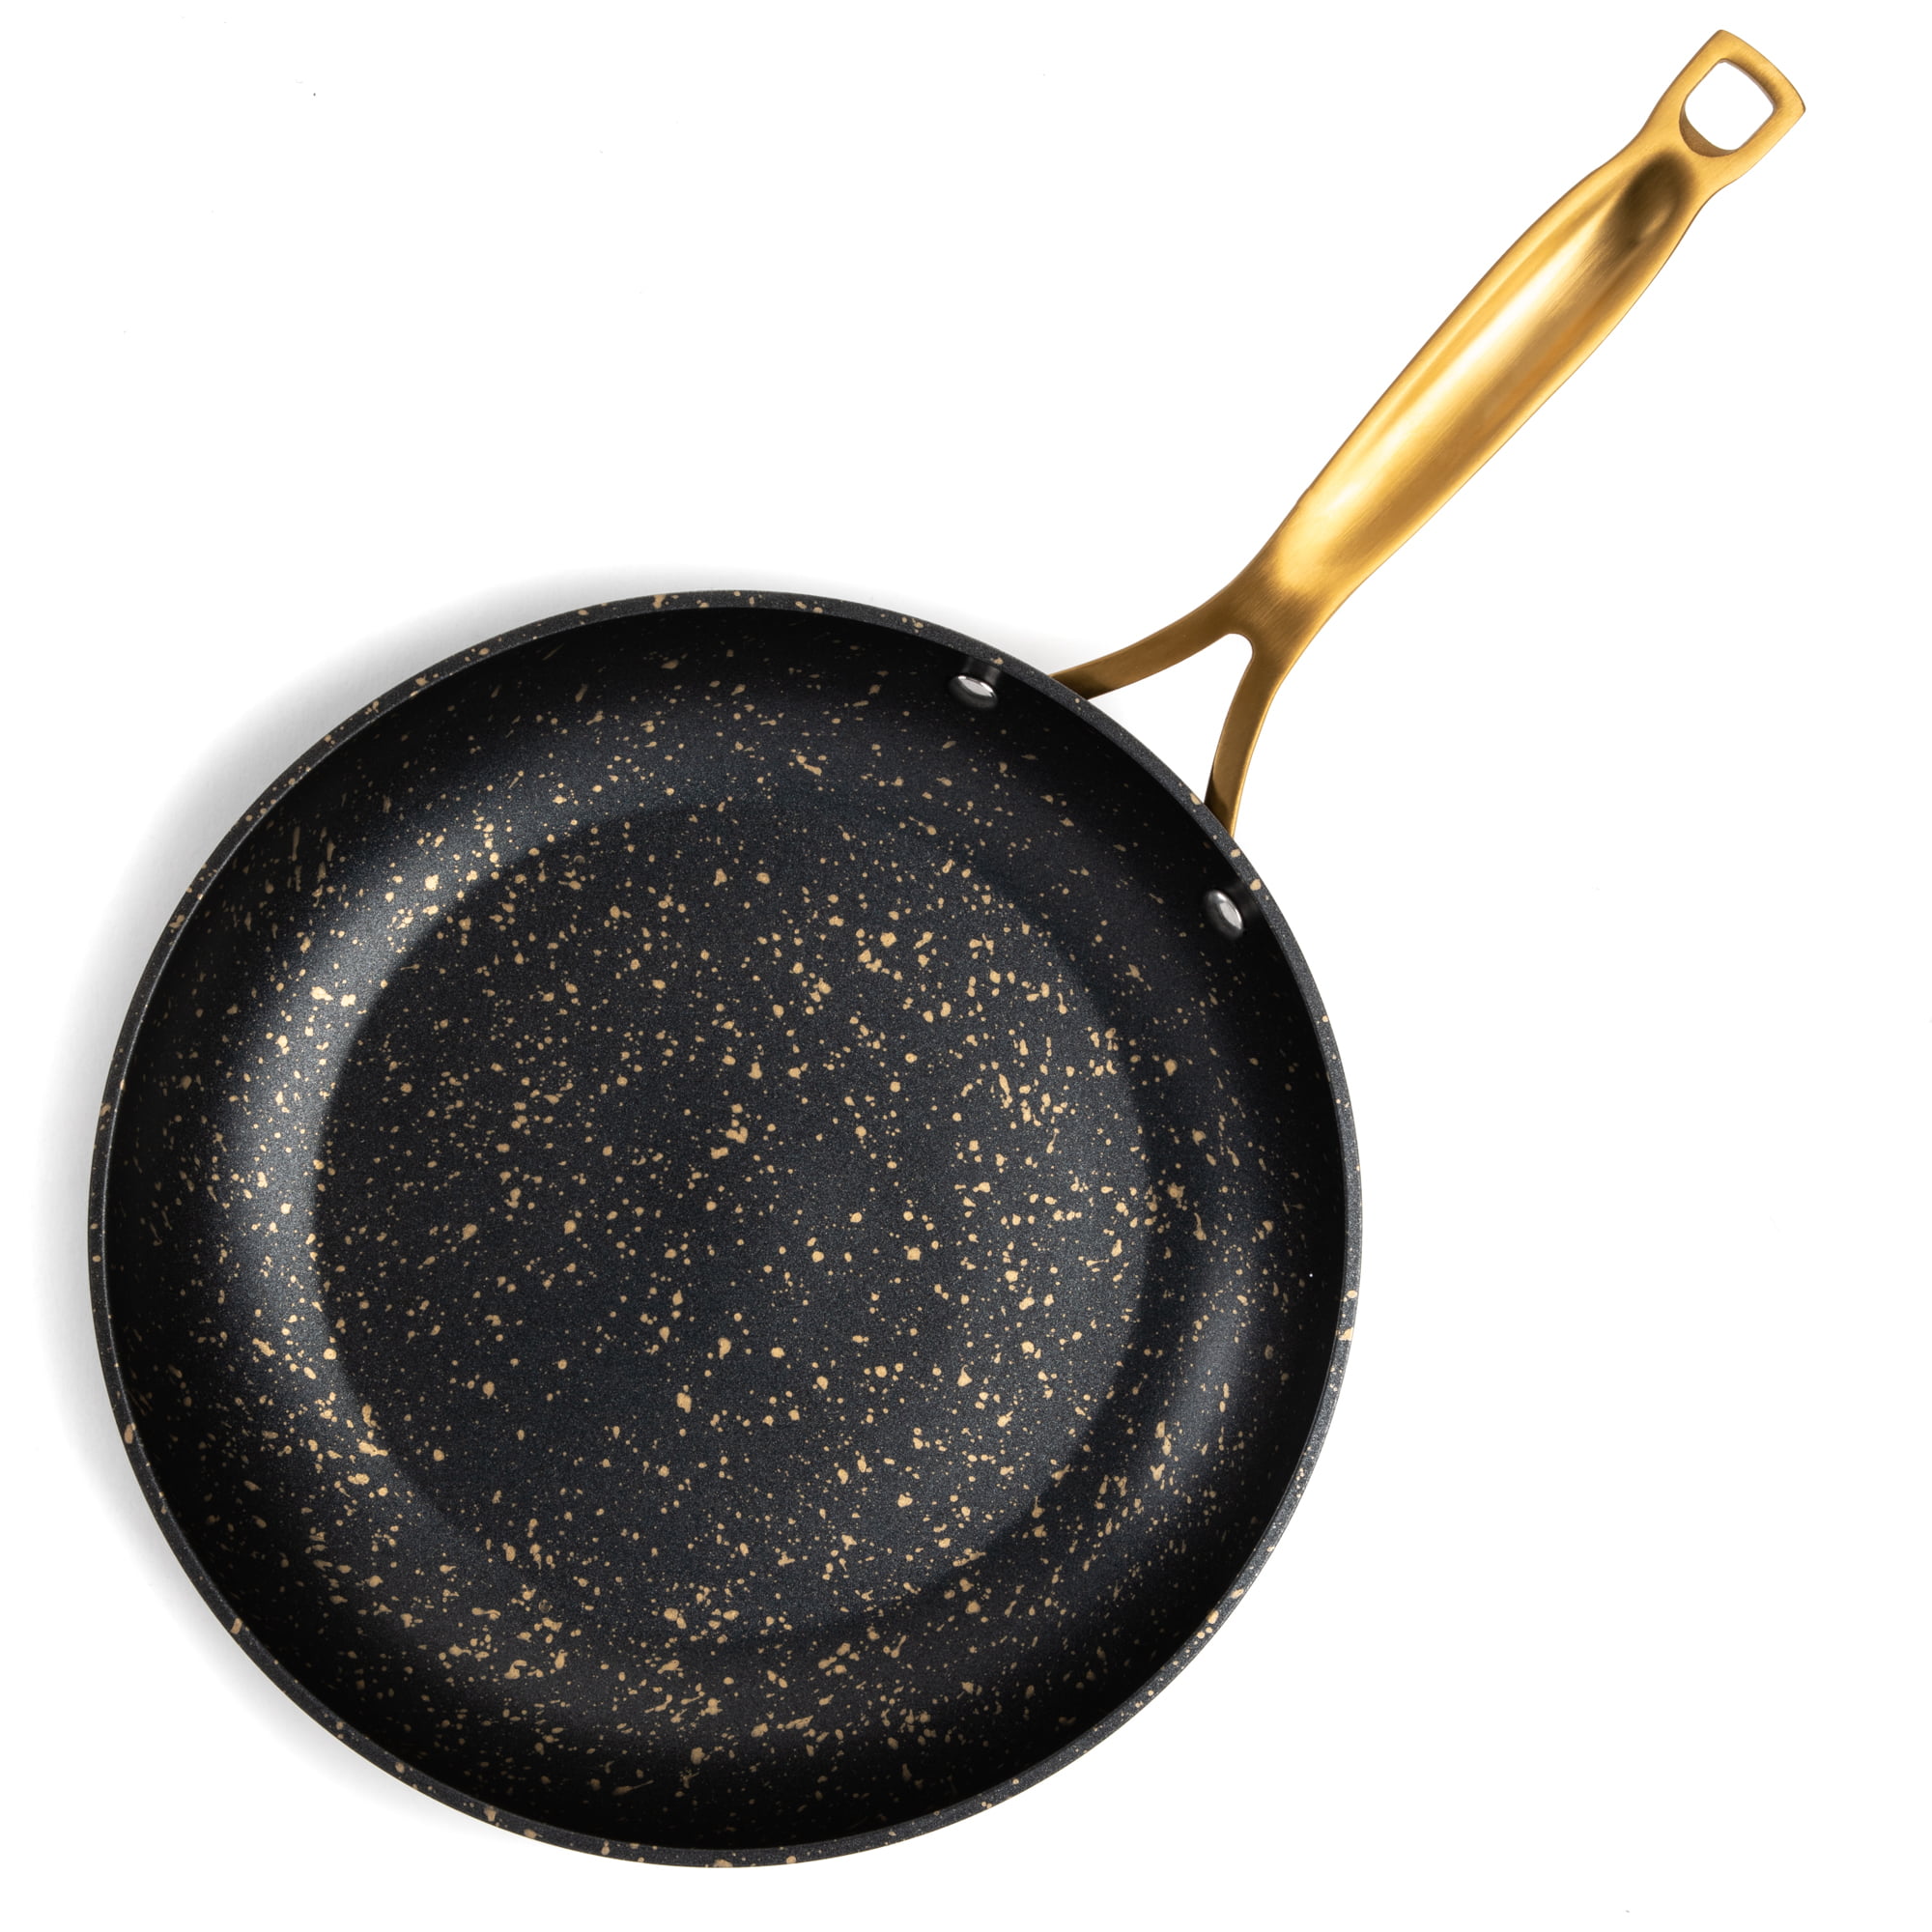 Gold Handle 8 and 11 Frying Pan Combo Editions